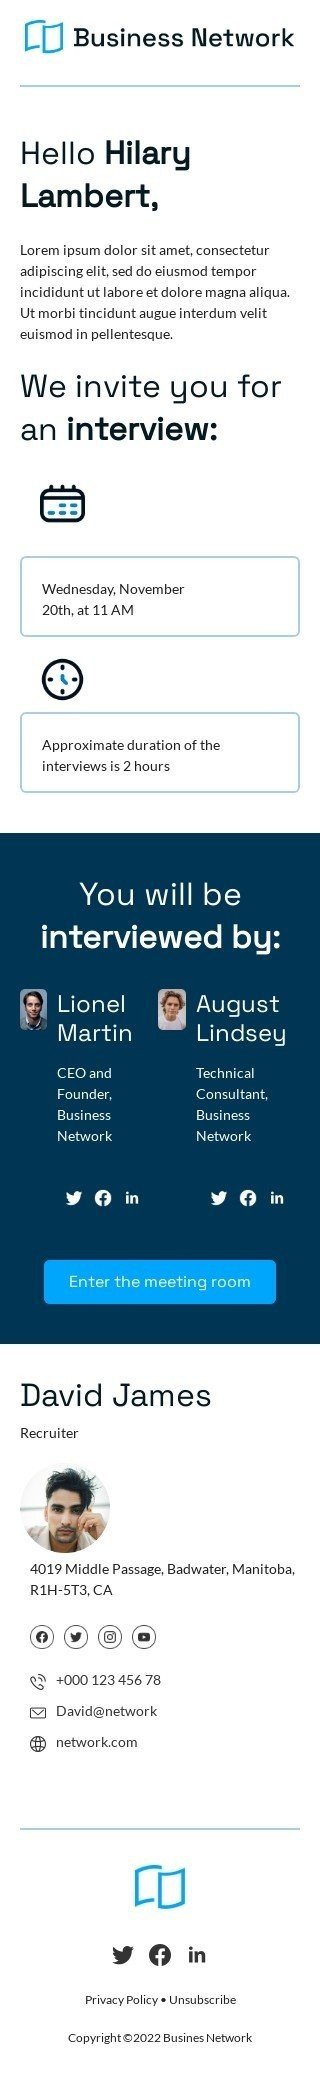 Promo email template "We invite you for an interview" for business industry mobile view